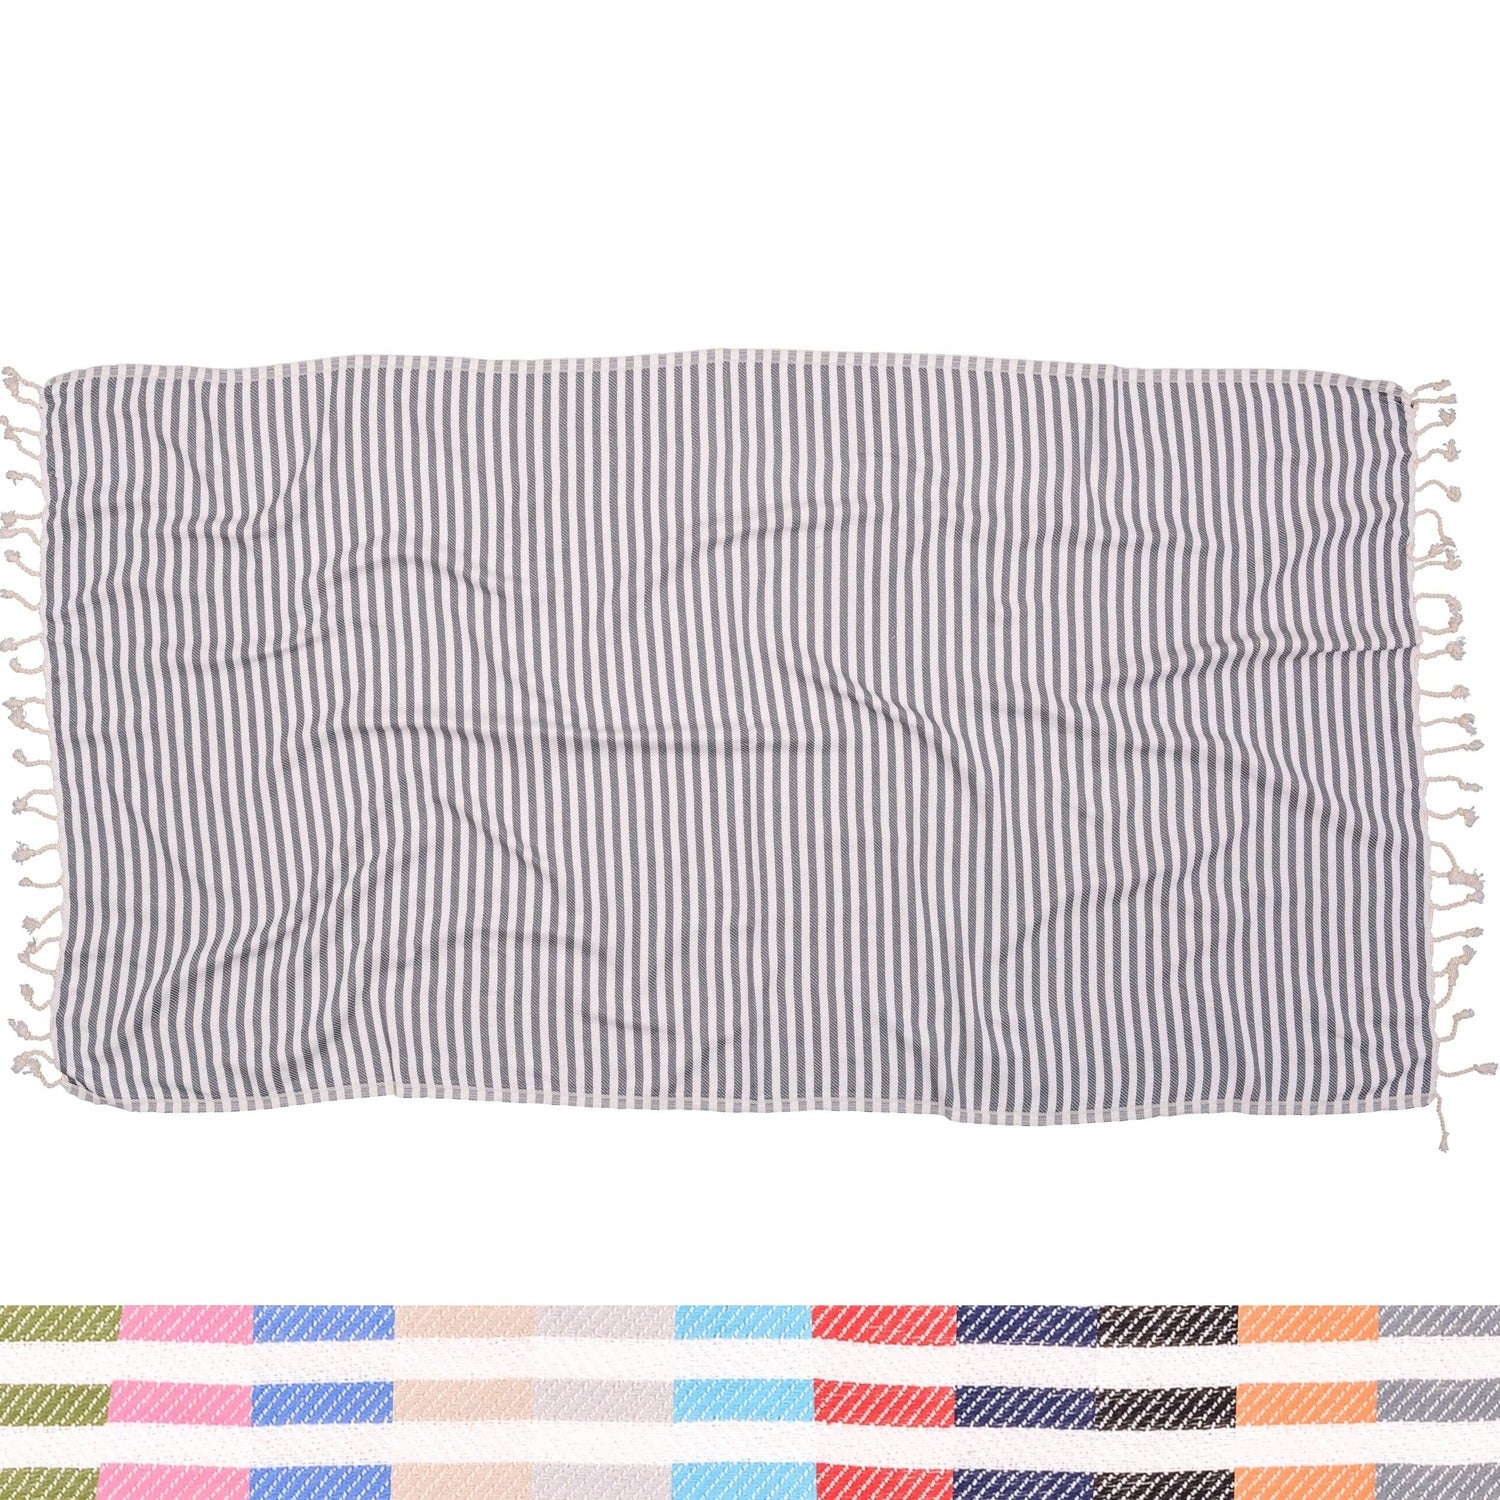 Antibes Striped Blanket - The Riviera Towel Company